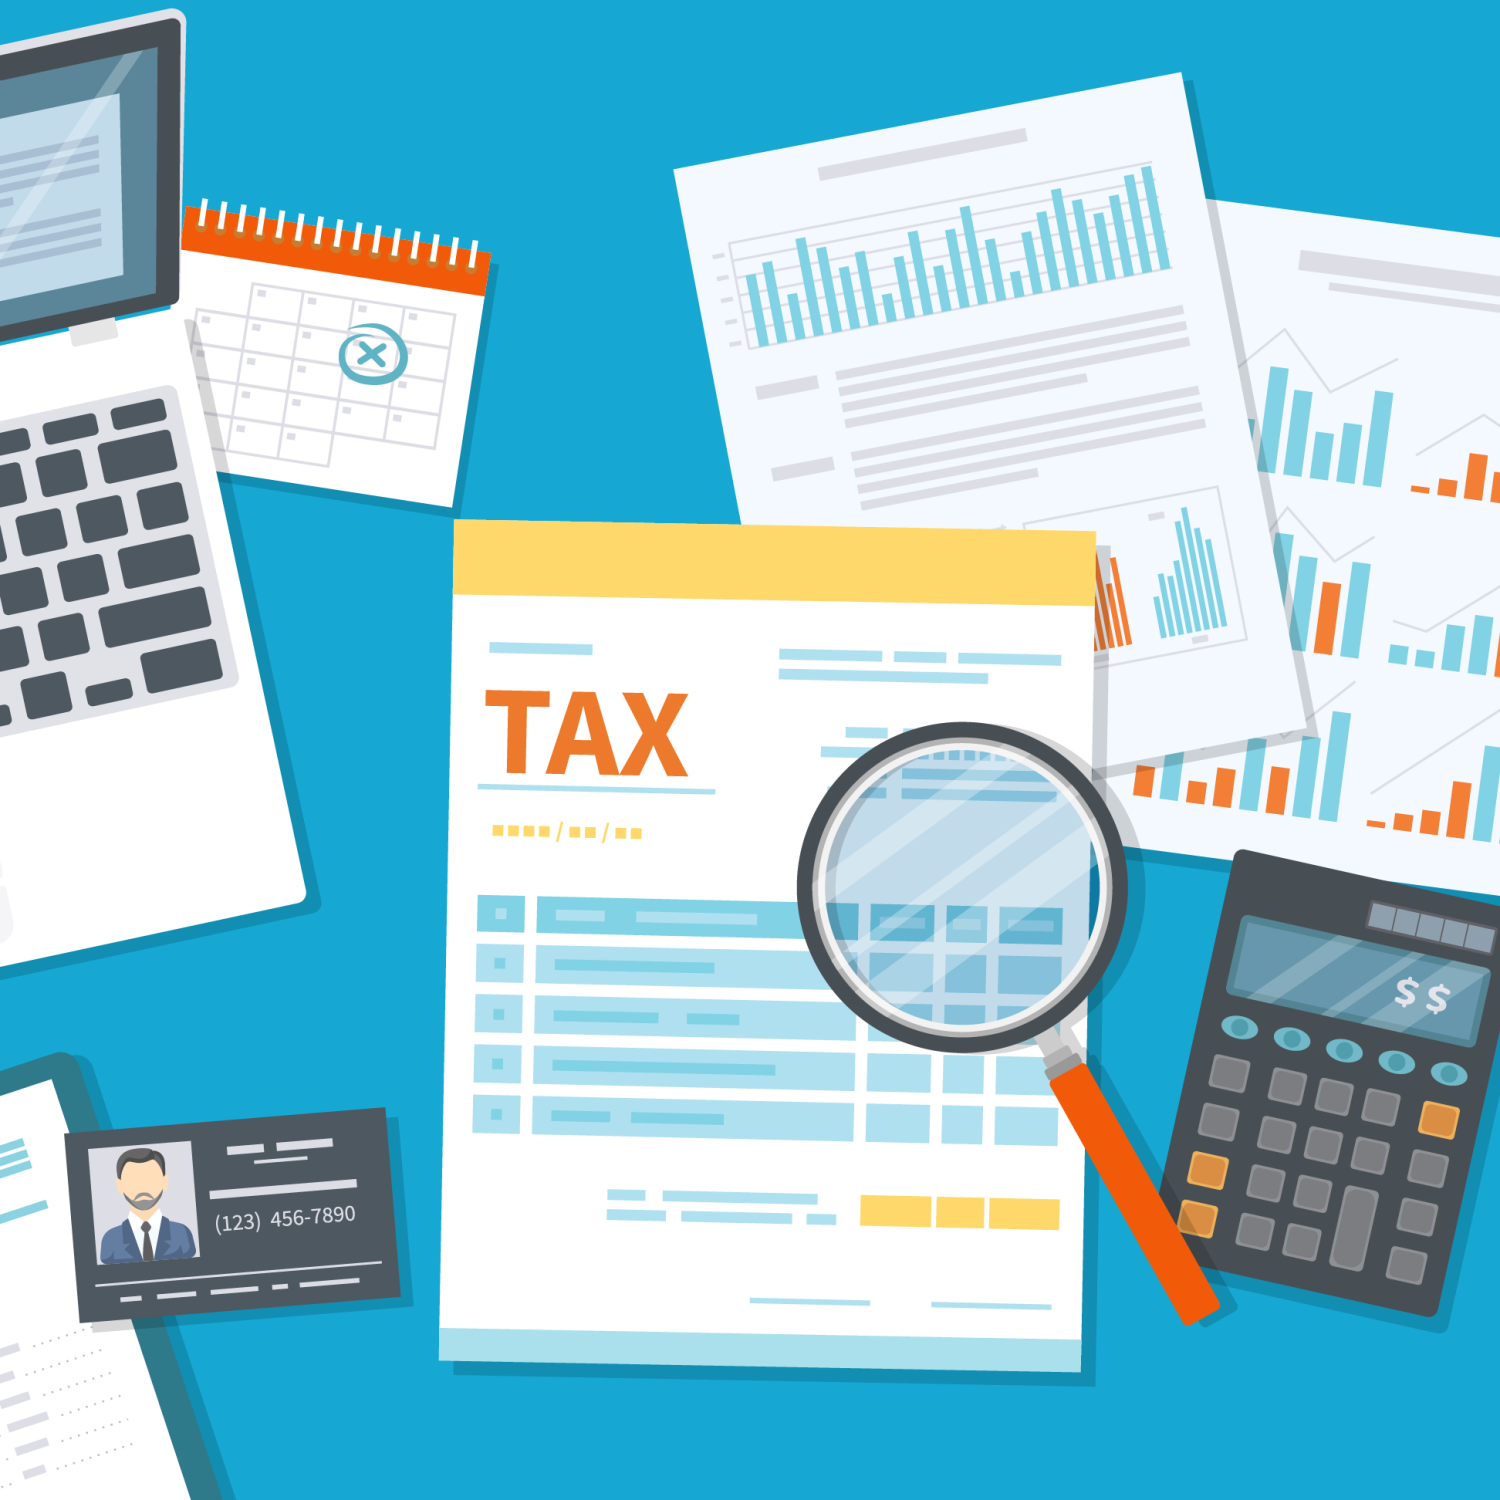 Graphic featuring a tax document, calculator, laptop, ID, calendar and more.